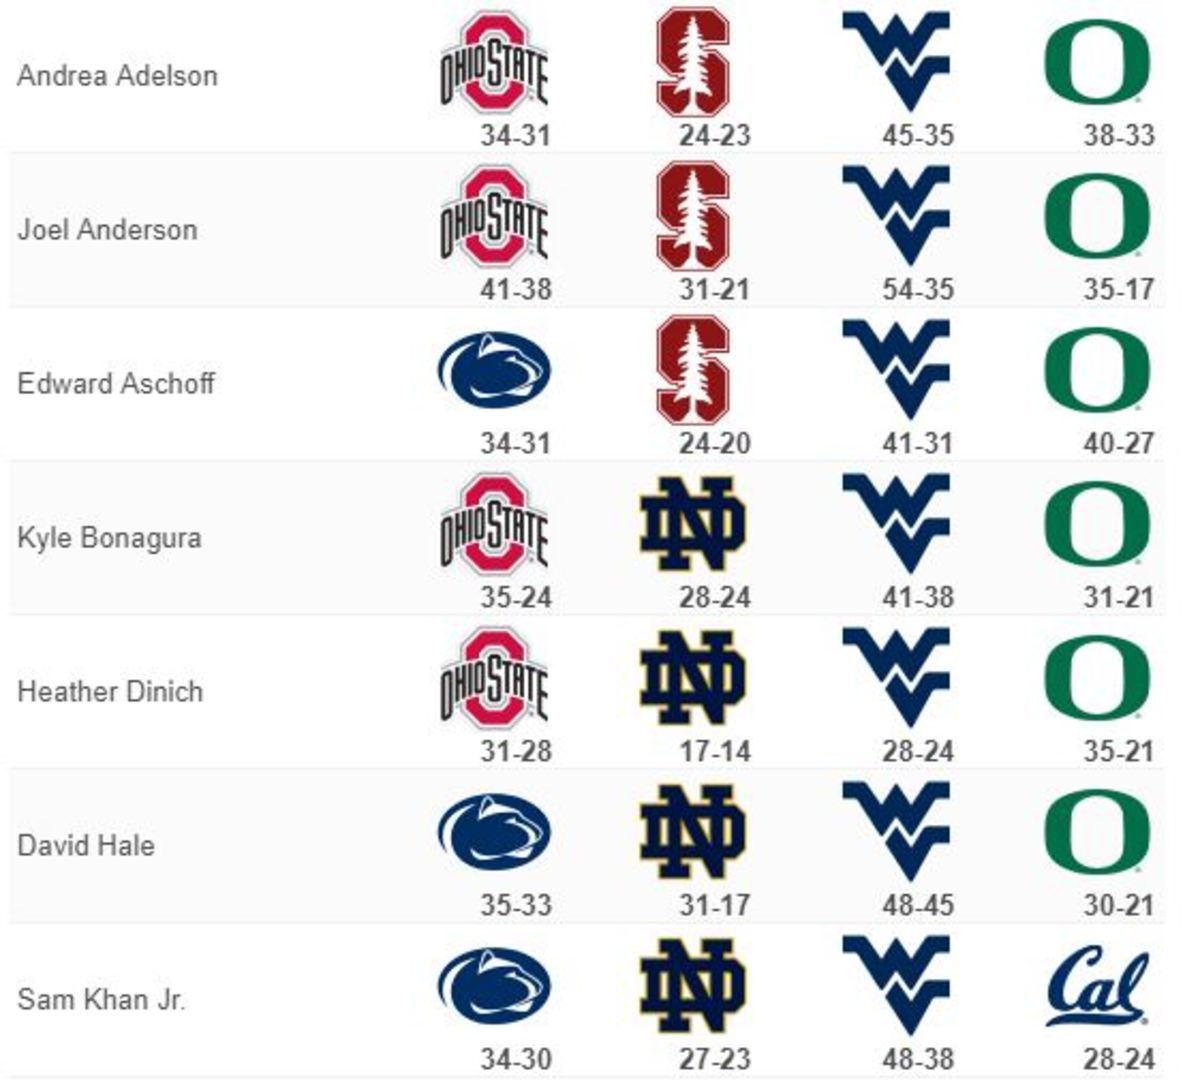 ESPN writers' score predictions for College Football Week 5.